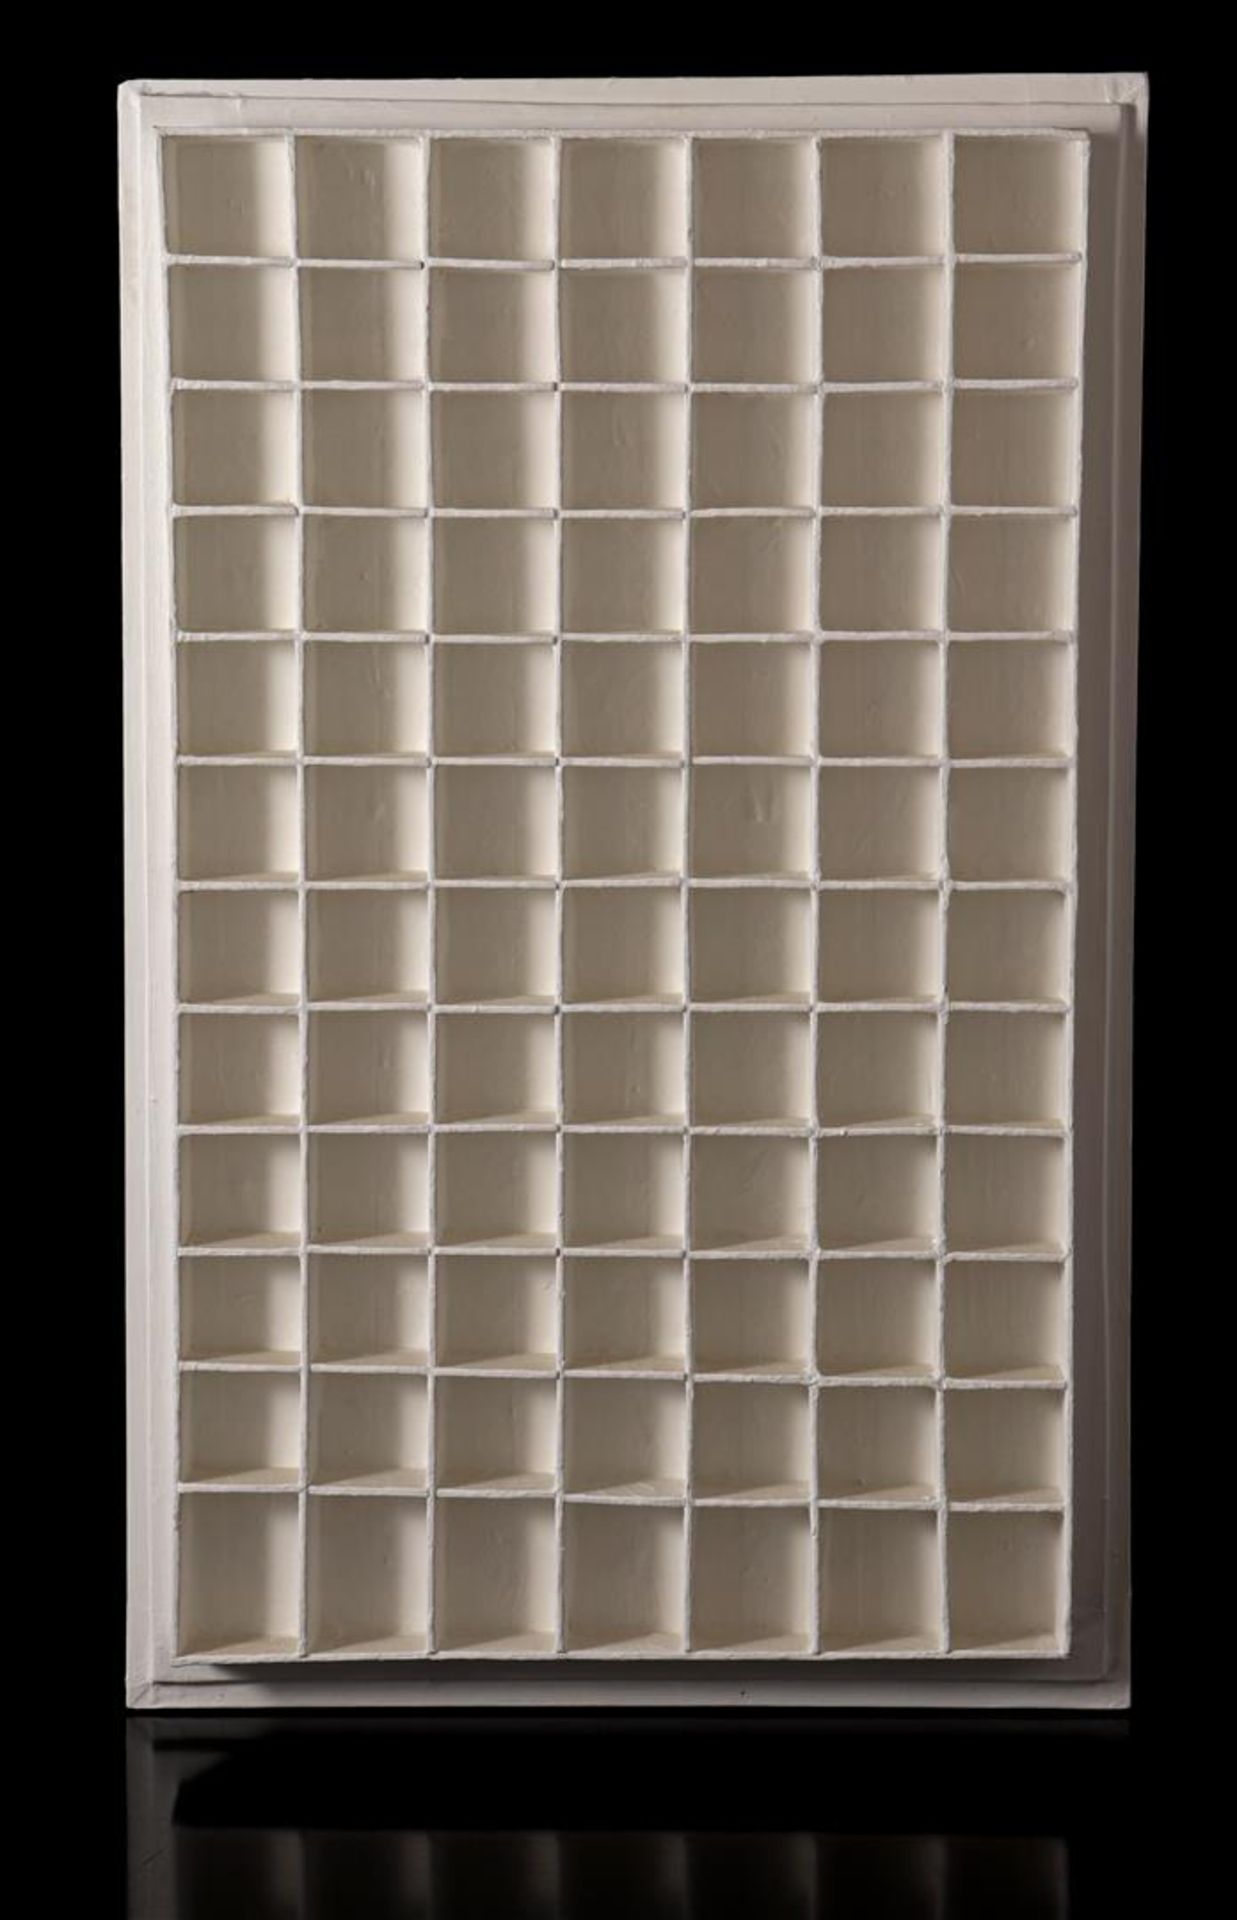 Anonymous, inspired by Jan Schoonhoven